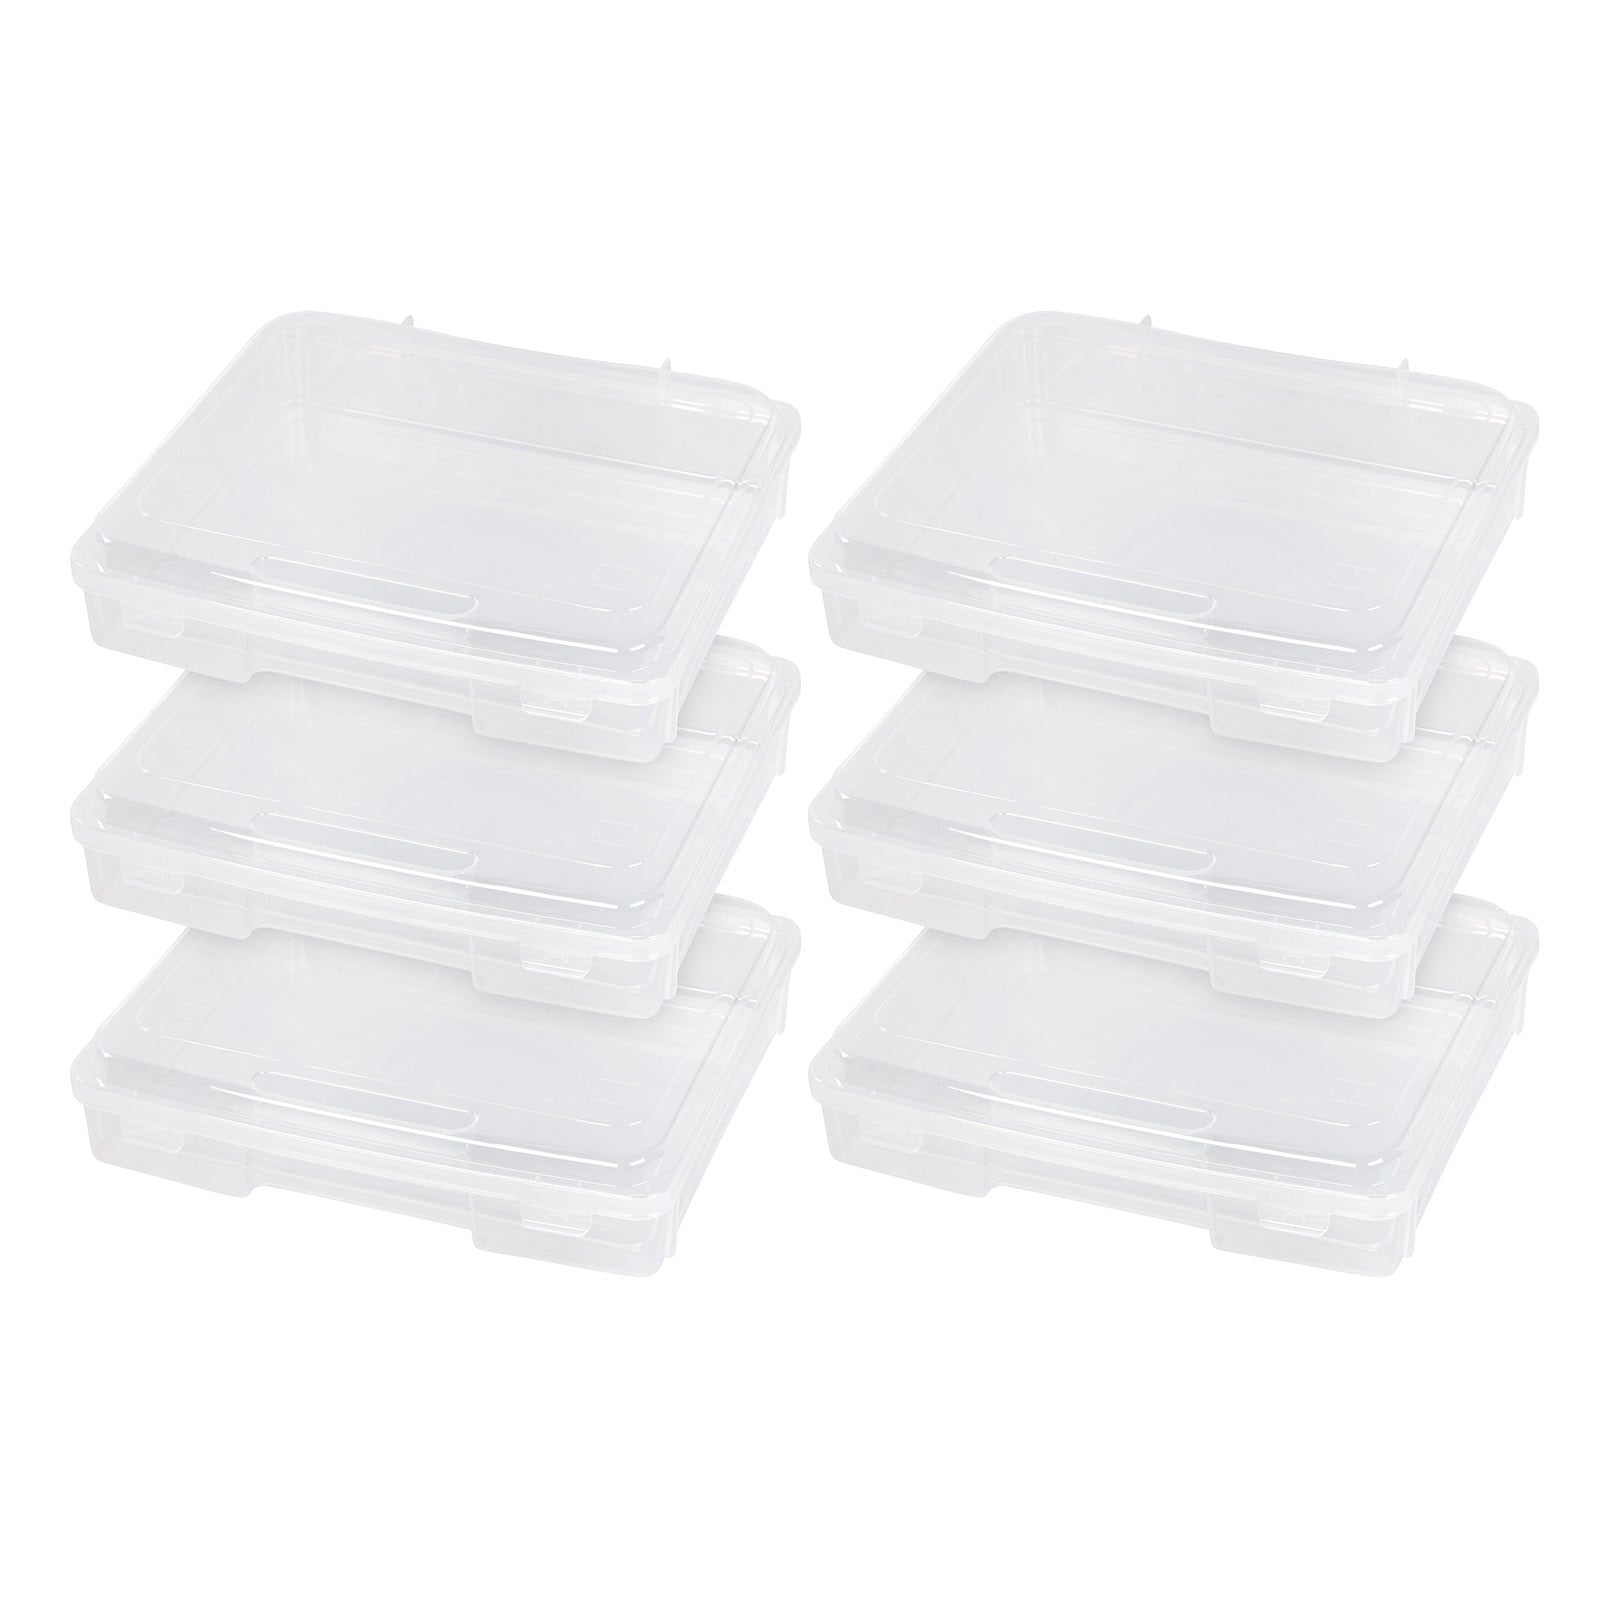 Iris 12 x 12 Slim Portable Project Case, 10 Pack, Clear